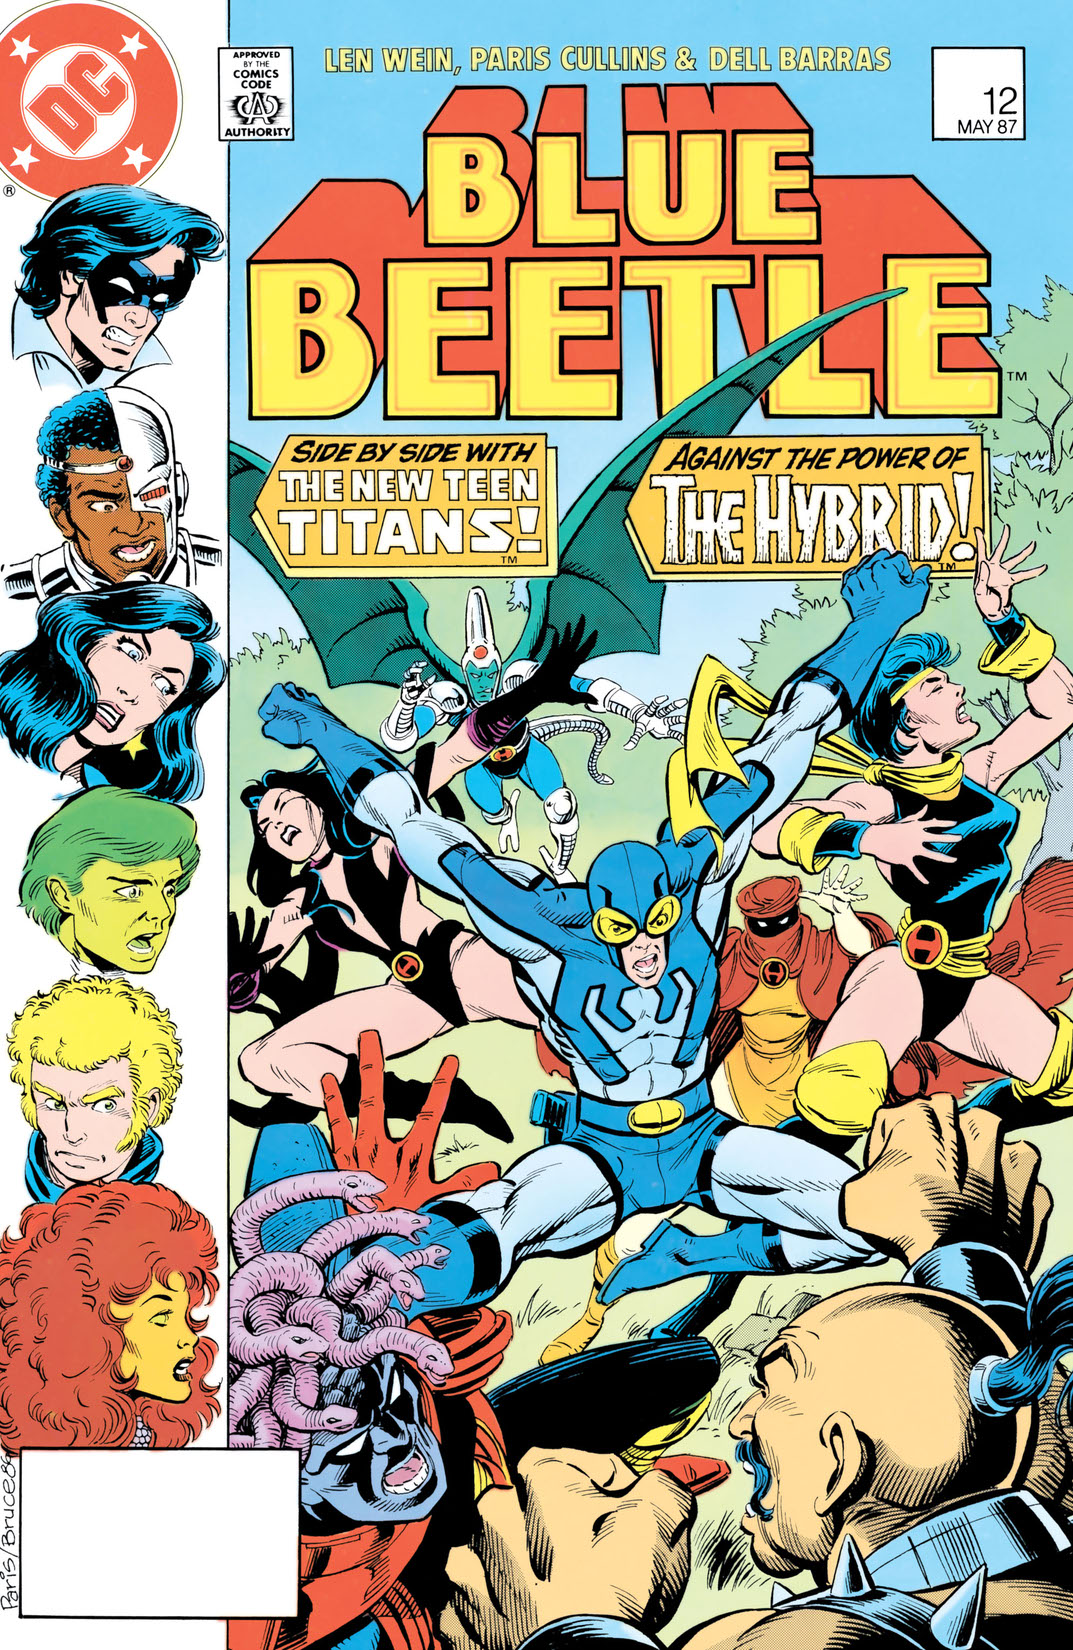 Blue Beetle (1986-) #12 preview images